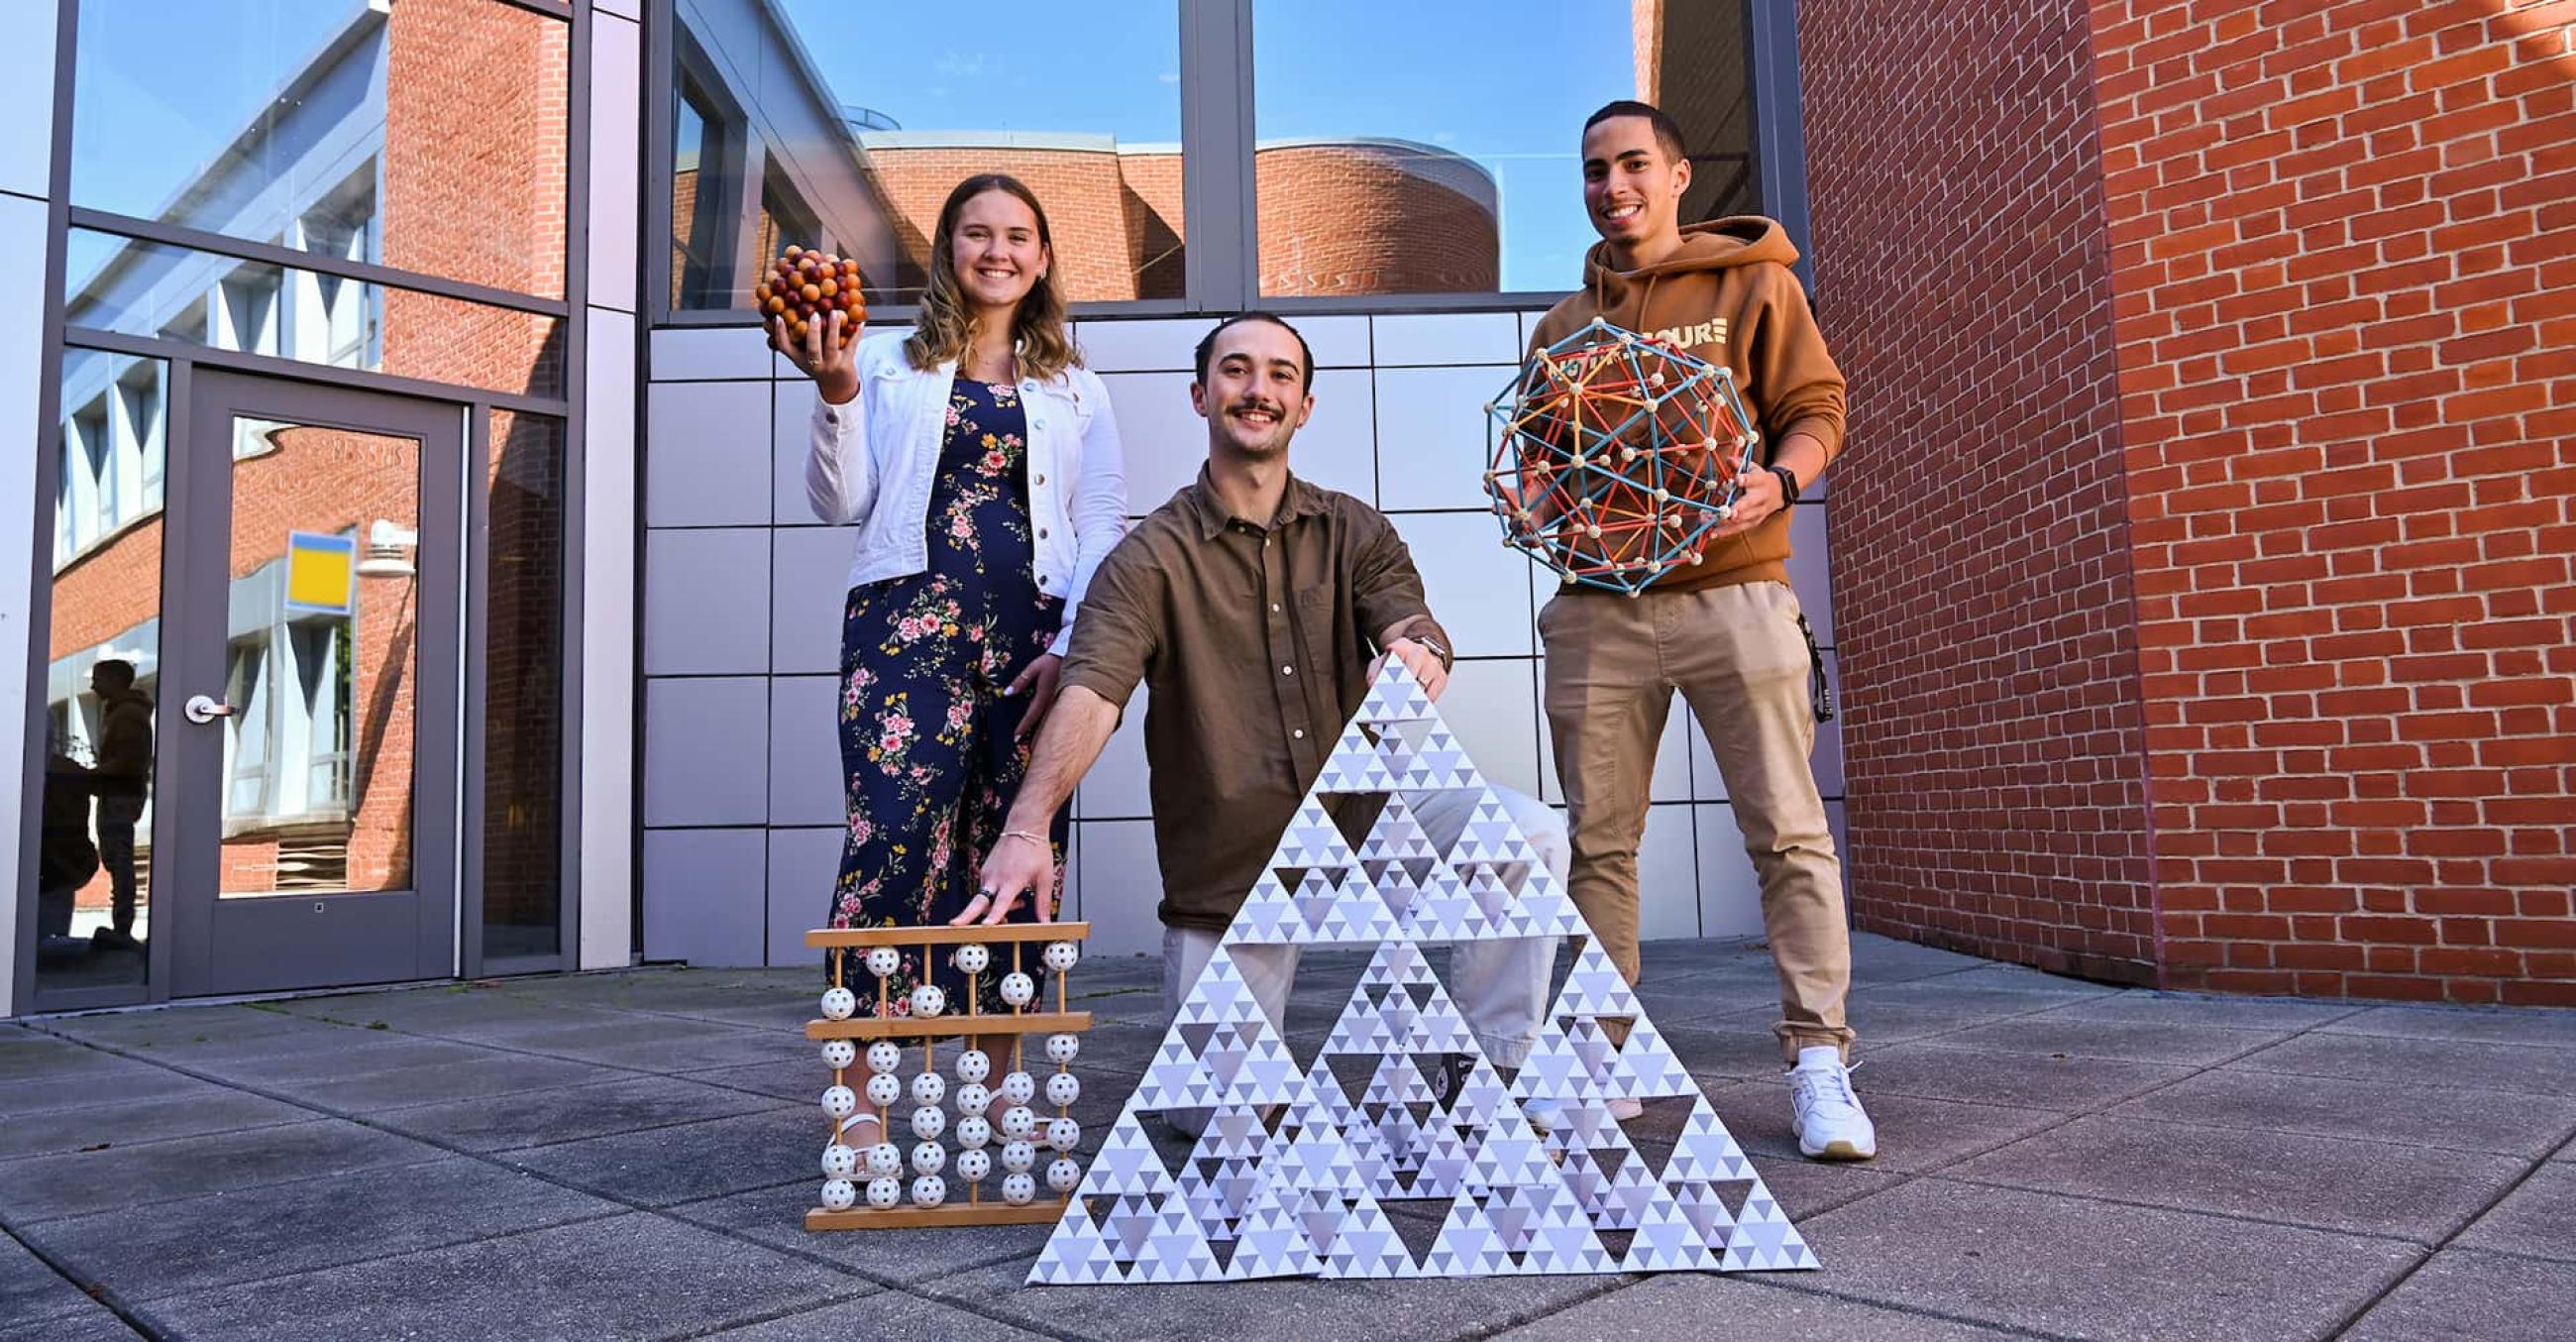 three students pose with objects related to math and science